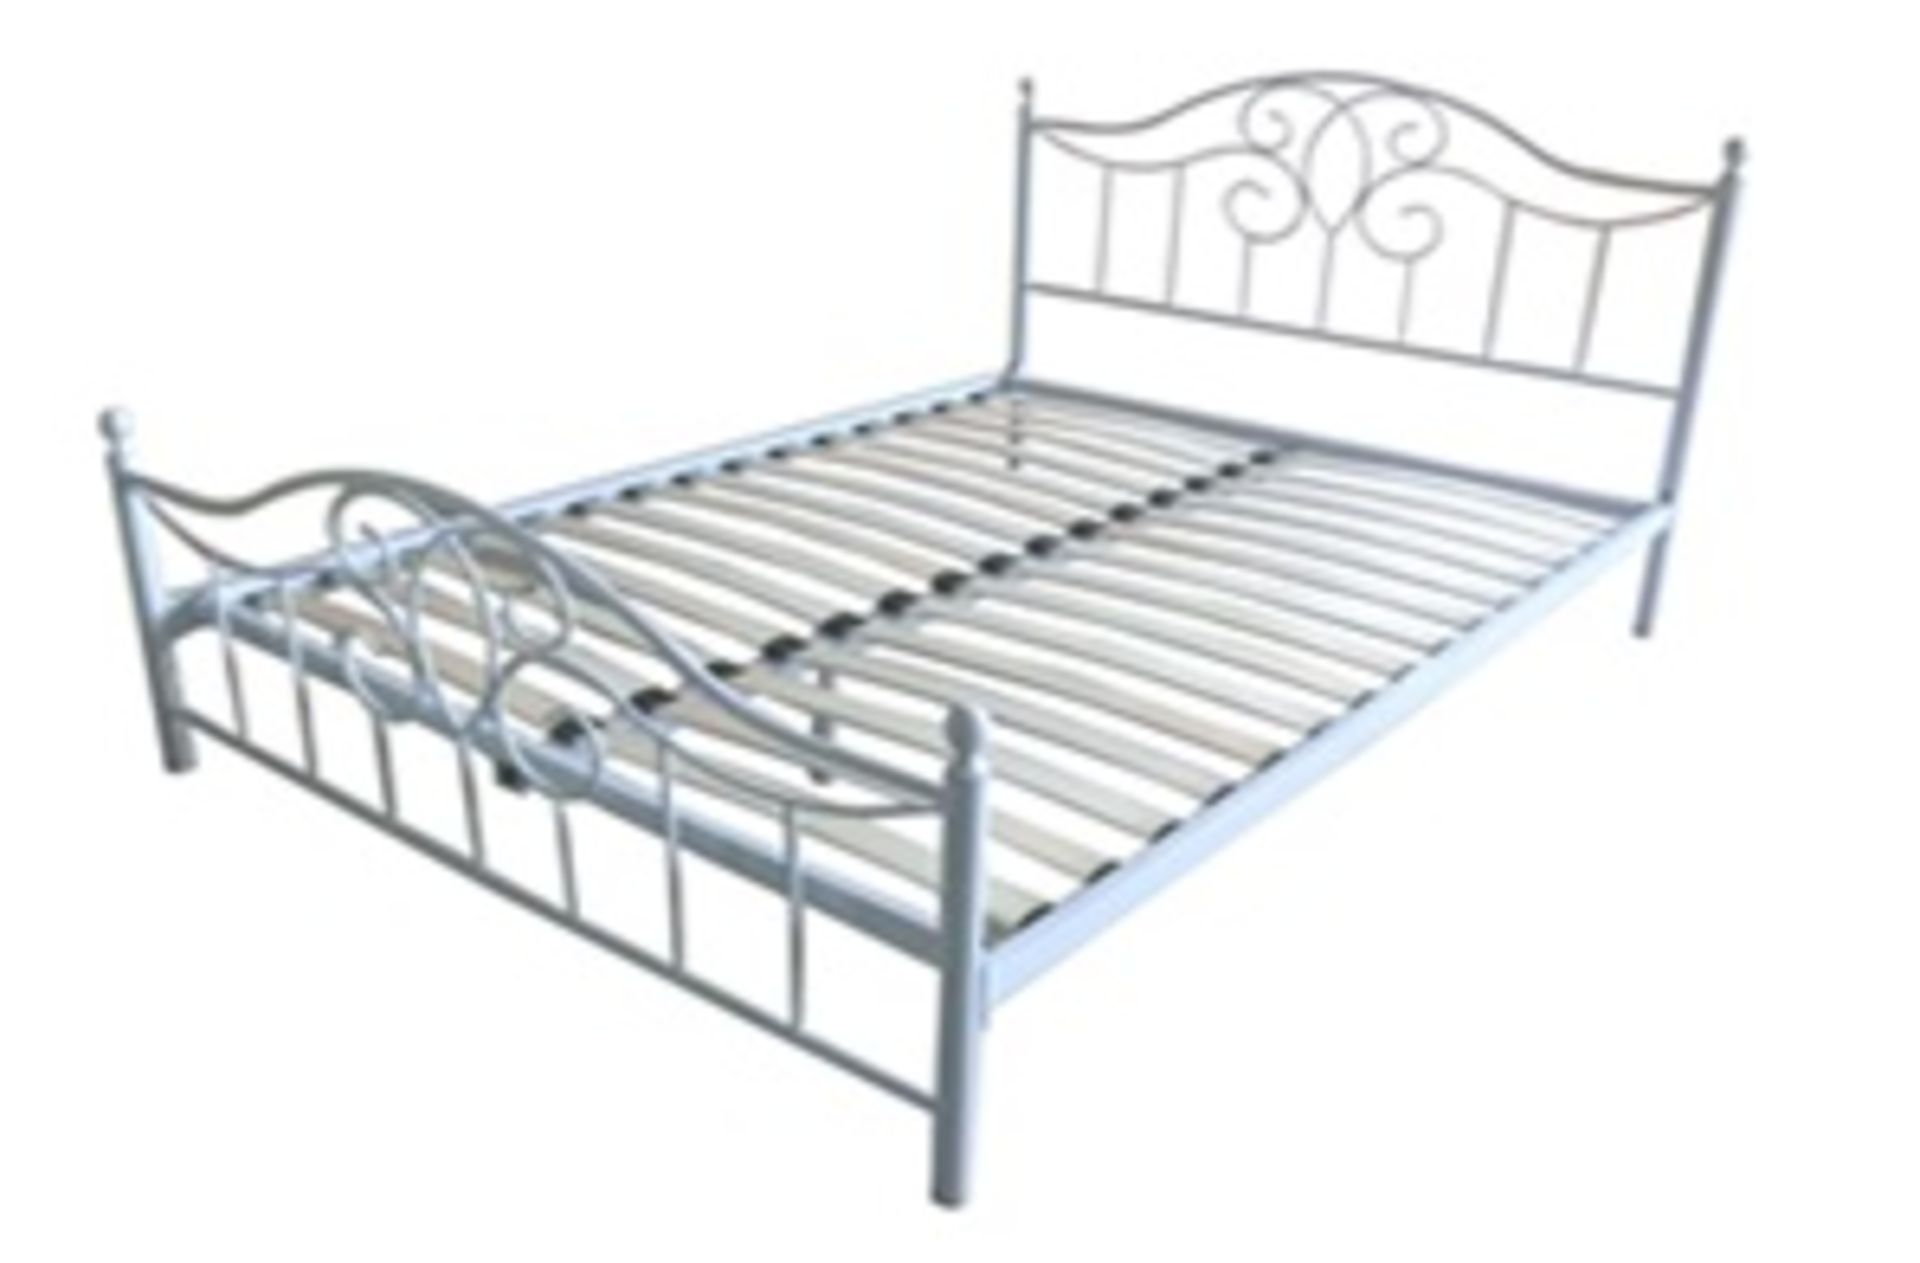 1 x Silver Metal Bed (Brand New & Boxed)